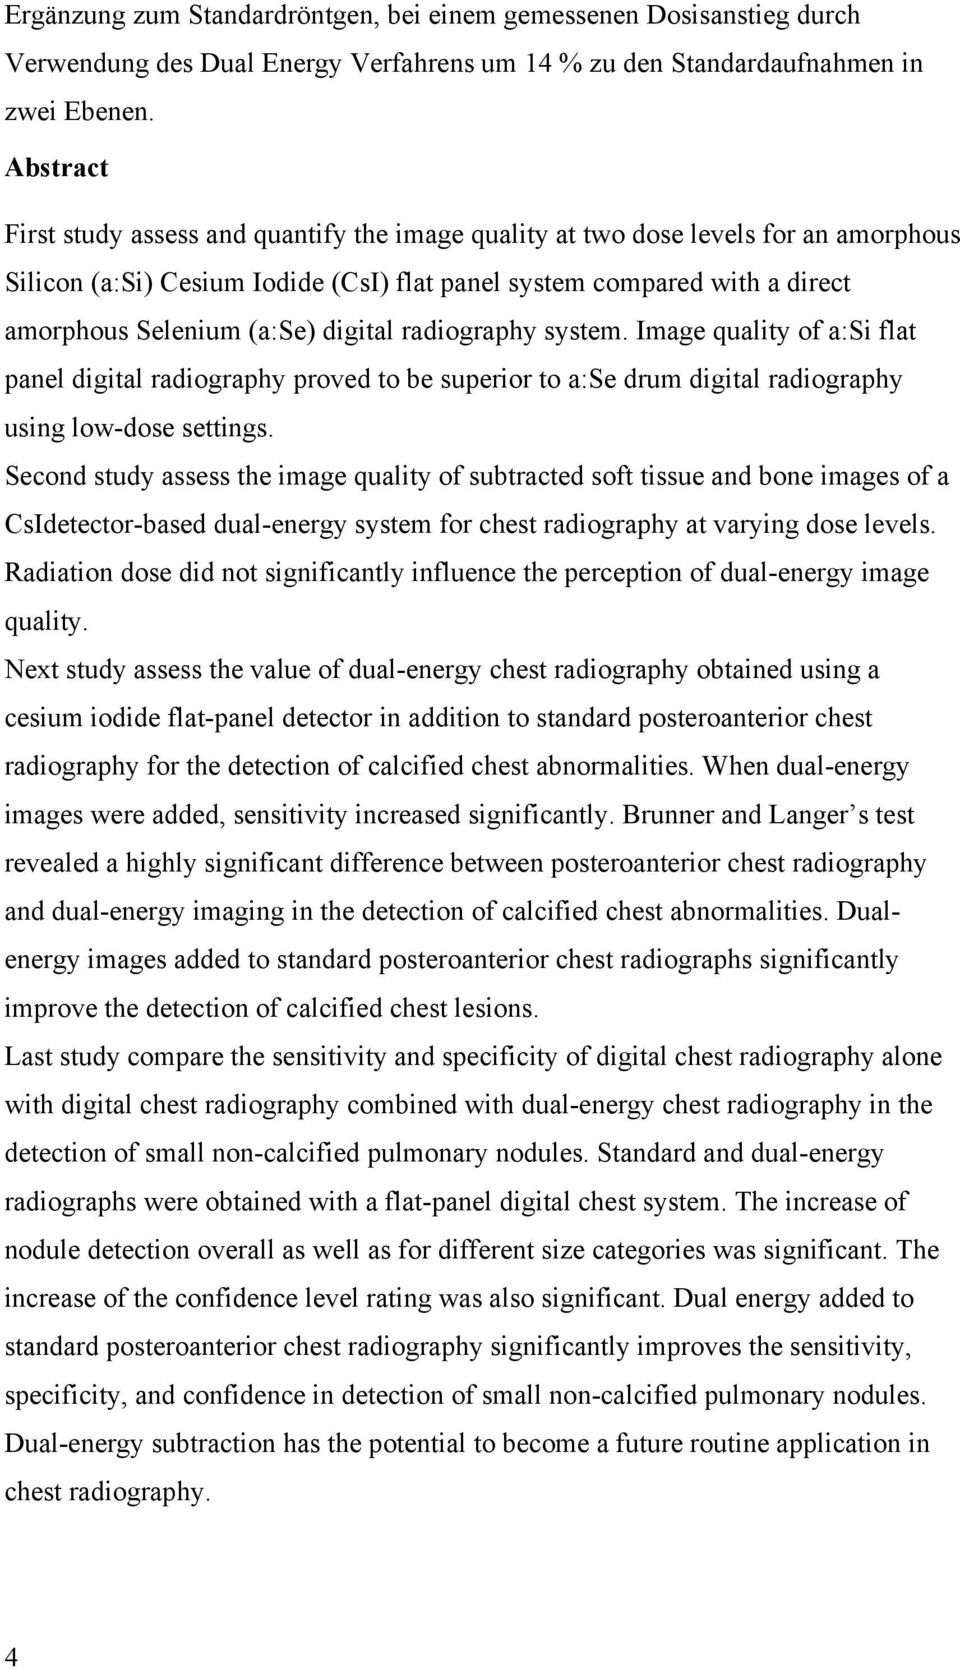 digital radiography system. Image quality of a:si flat panel digital radiography proved to be superior to a:se drum digital radiography using low-dose settings.